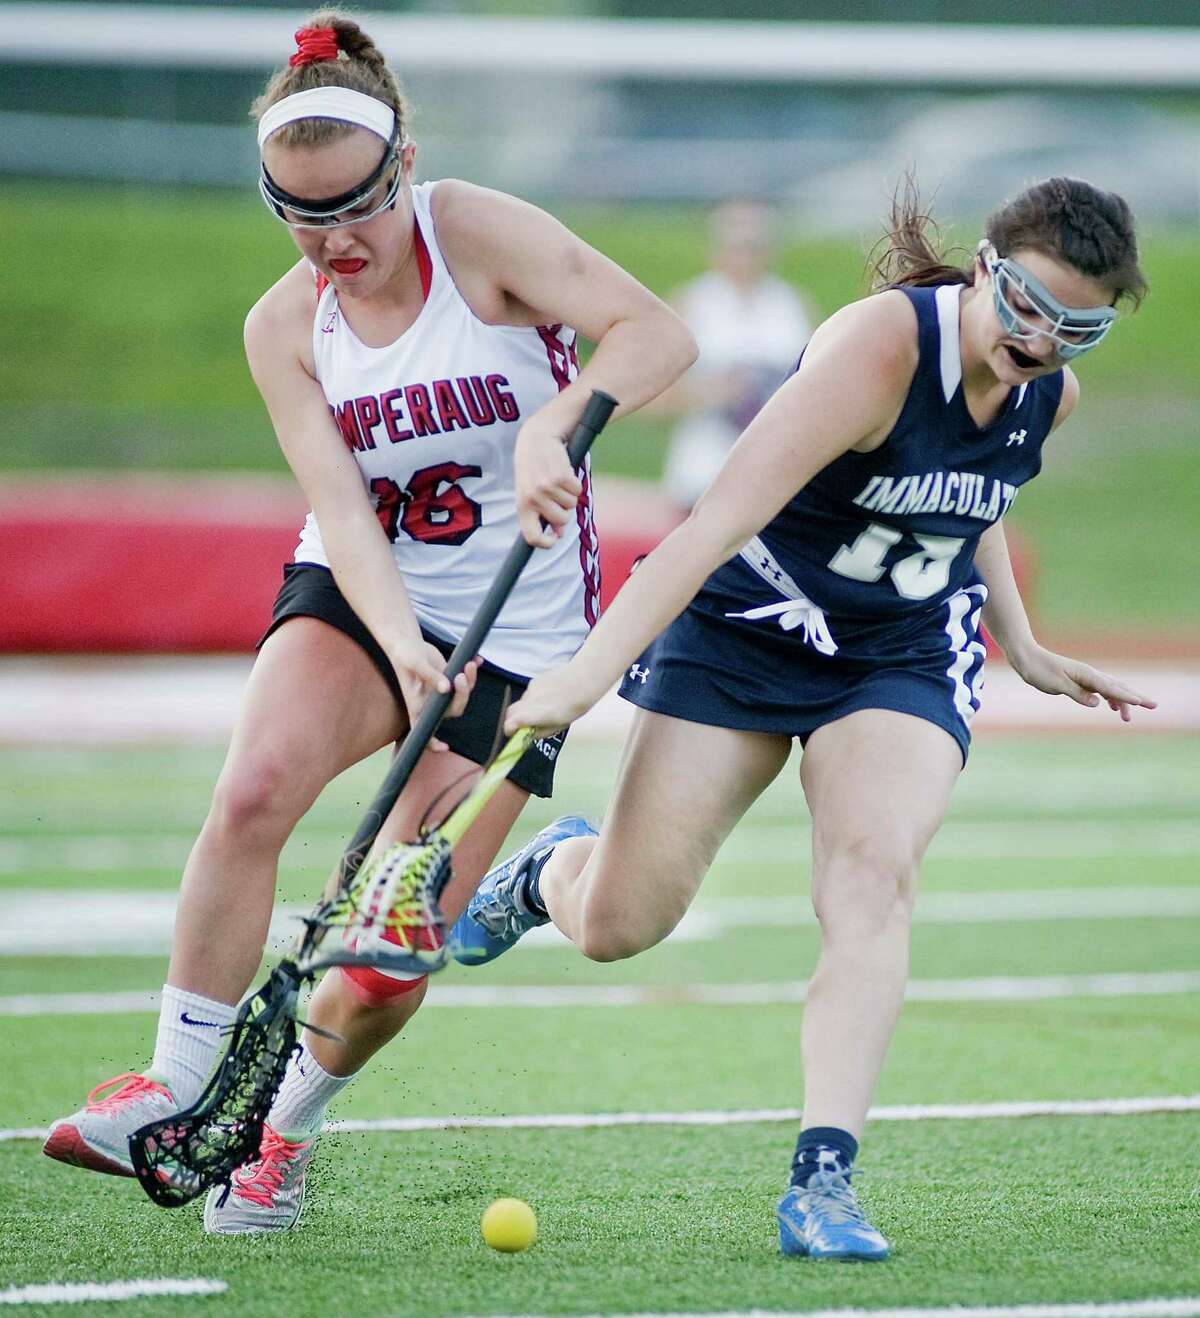 FILE PHOTO: Pomperaug High School's Hayley McCormick and Immaculate High School's Madeleine Wedvik fight for the ball during a game at Pomperaug. Tuesday, May 10, 2016